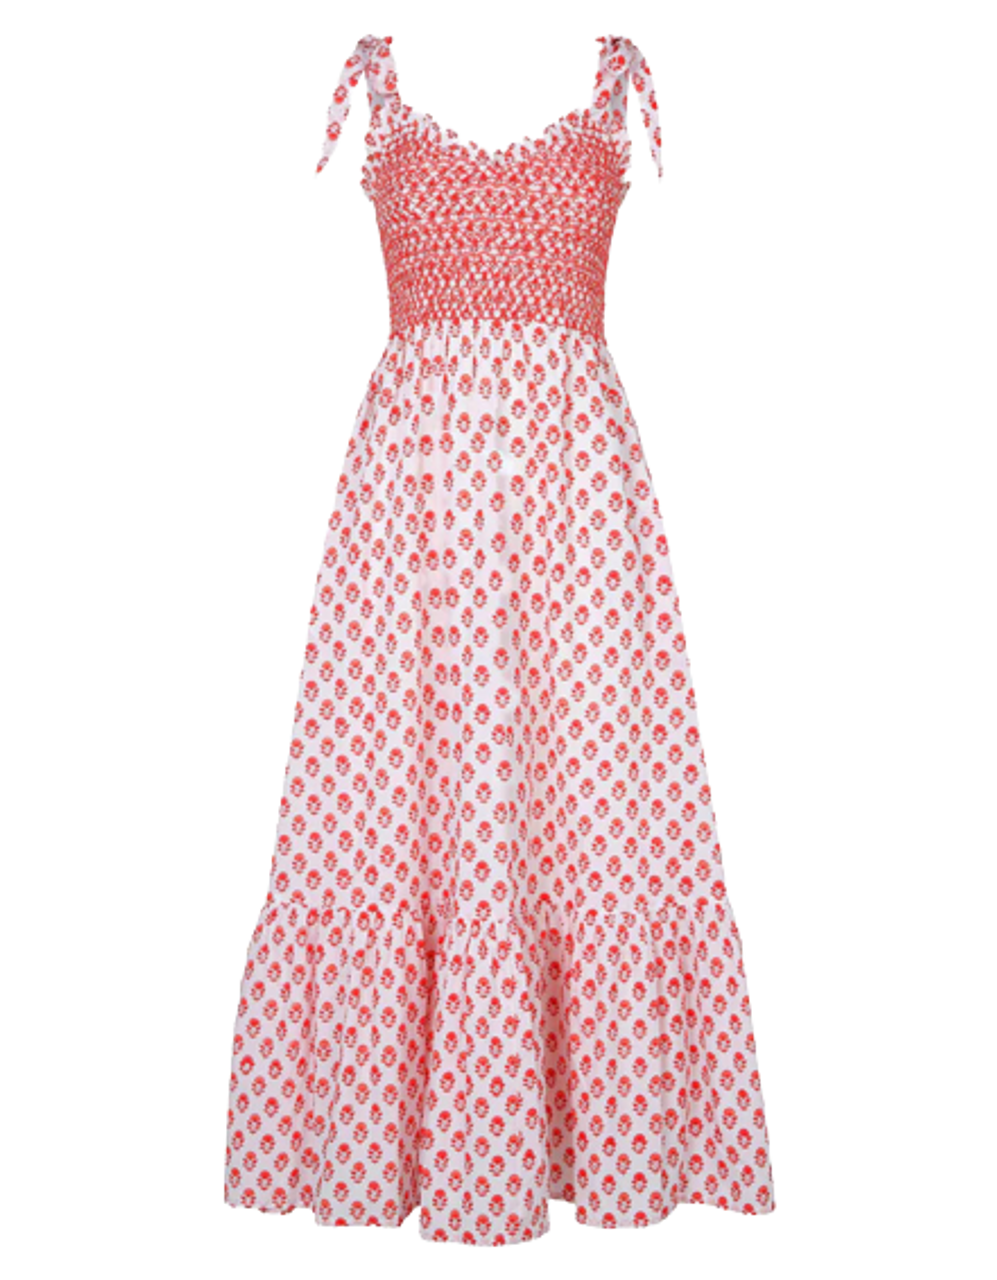 Pink City Prints Jessica Dress, Rose Meadow - Monkee's of Mount Pleasant